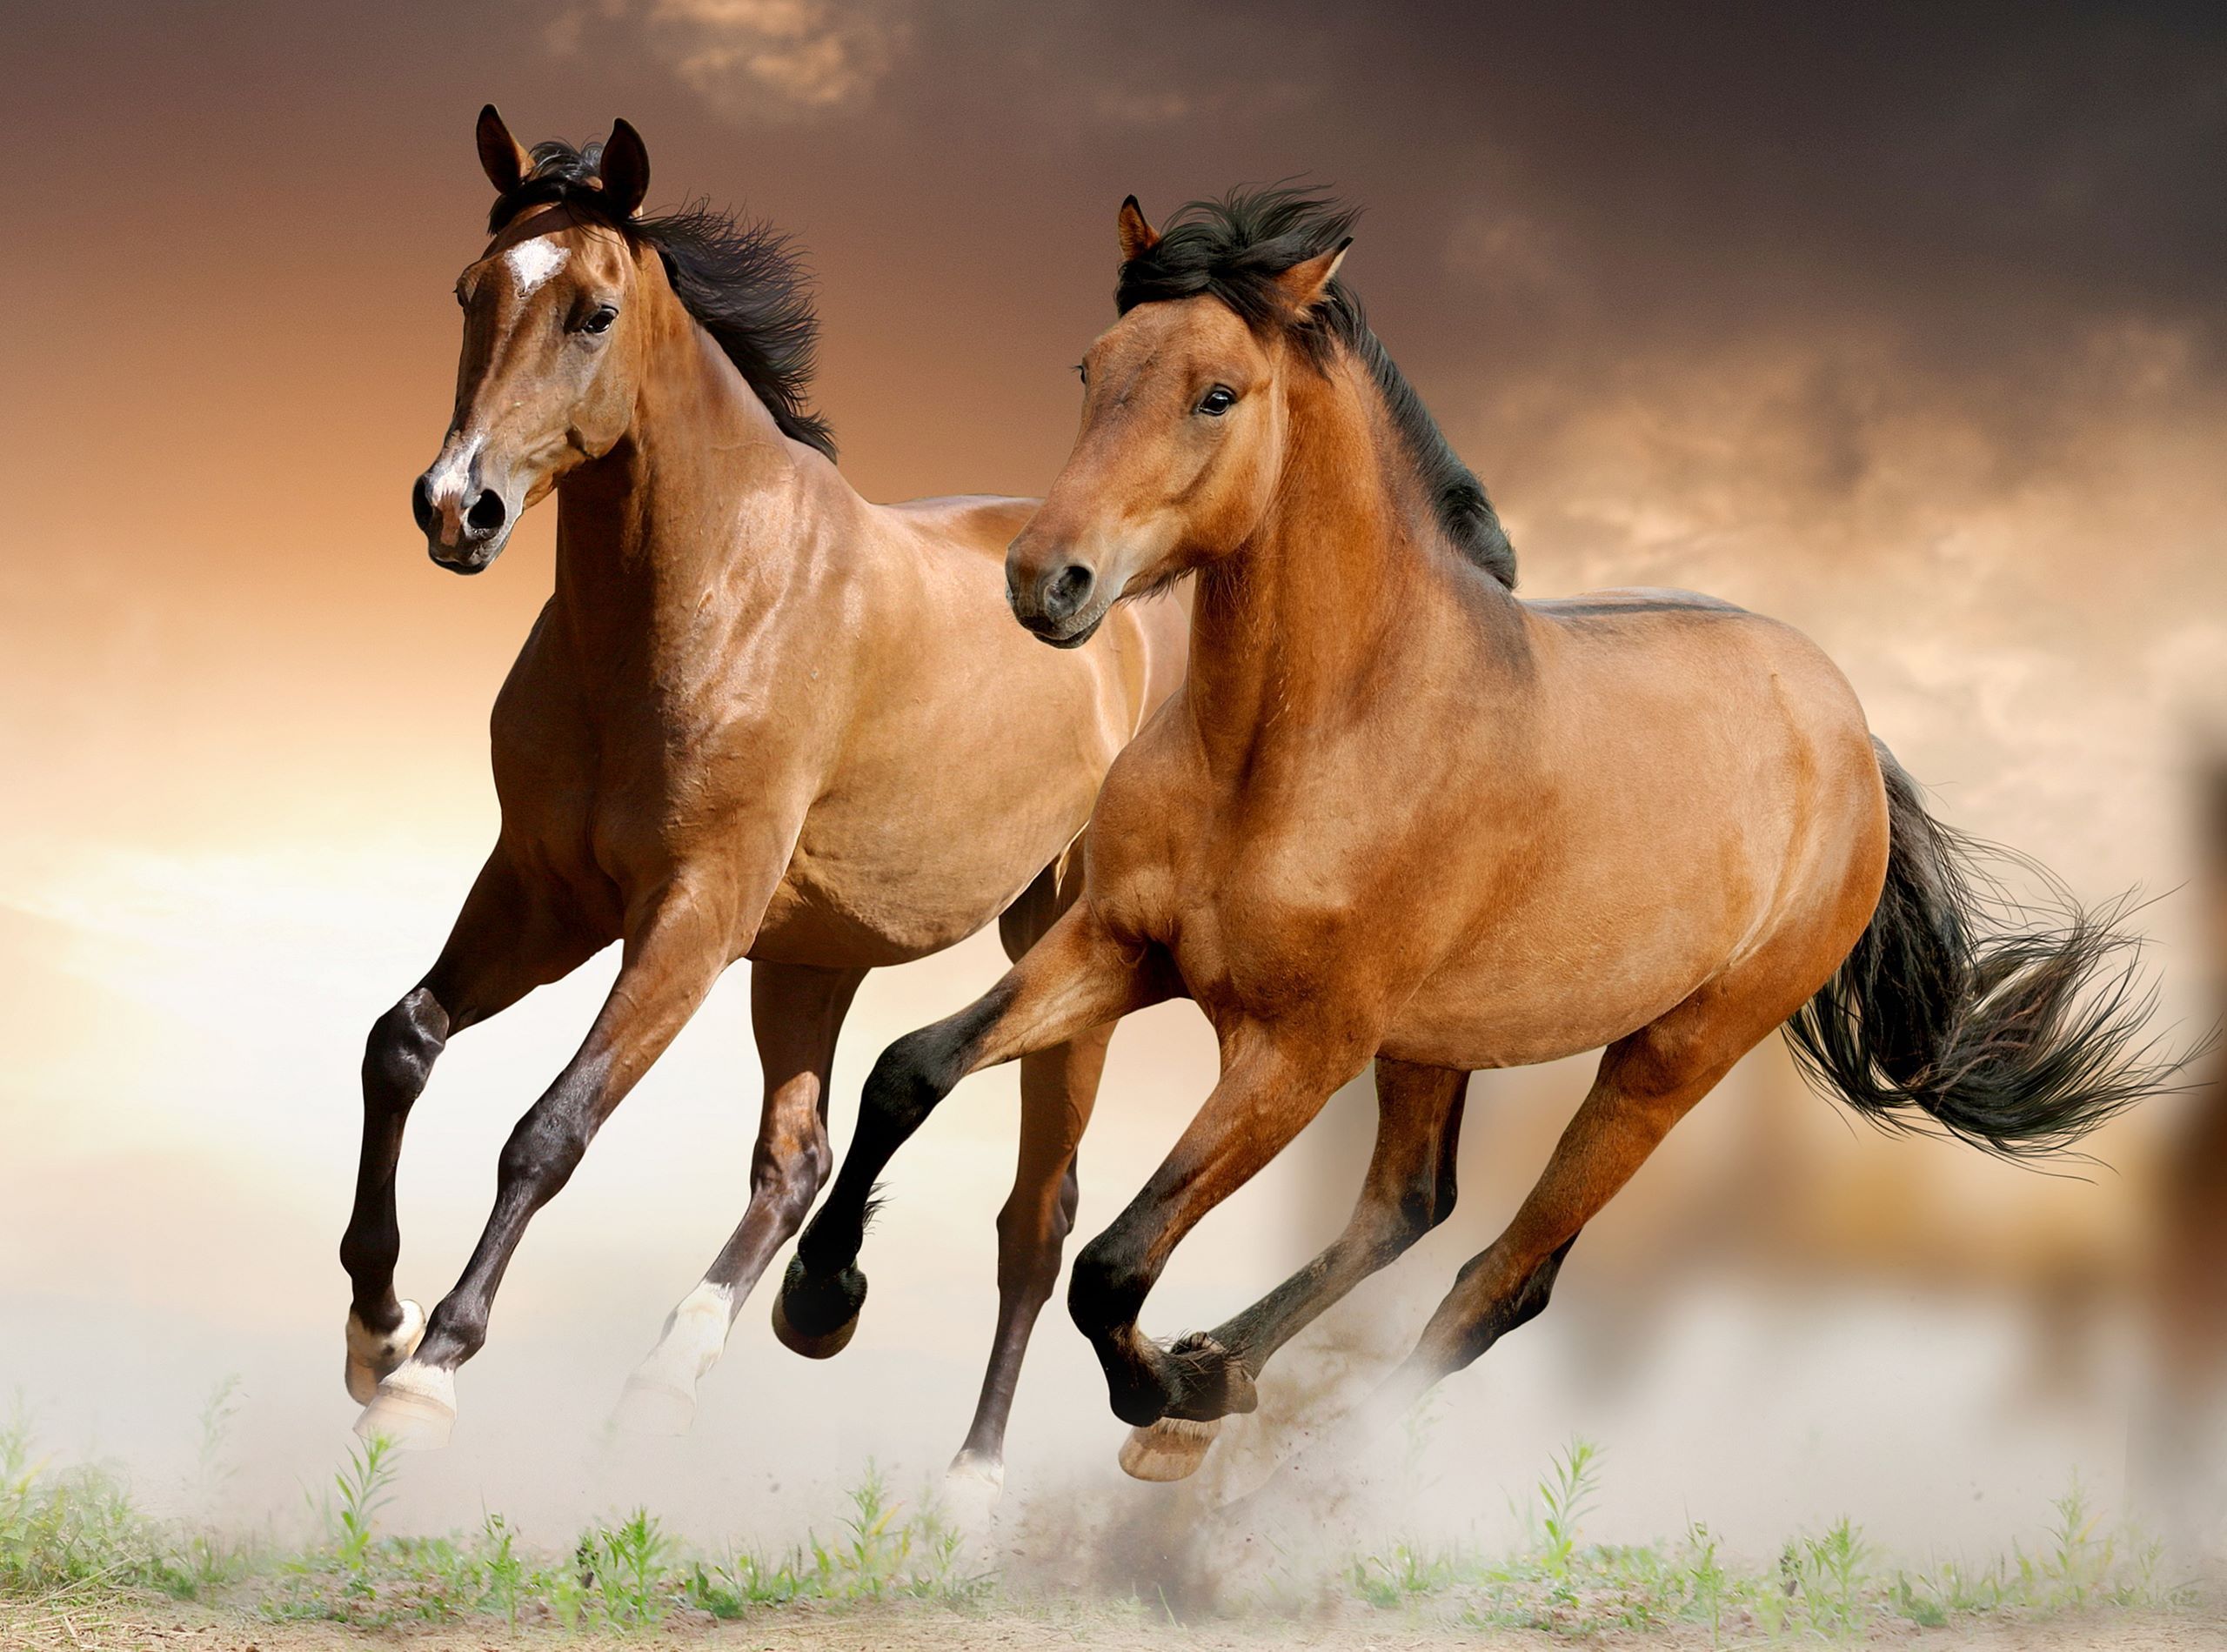 Brown Horses Running Wallpaper HD Pic Pictures